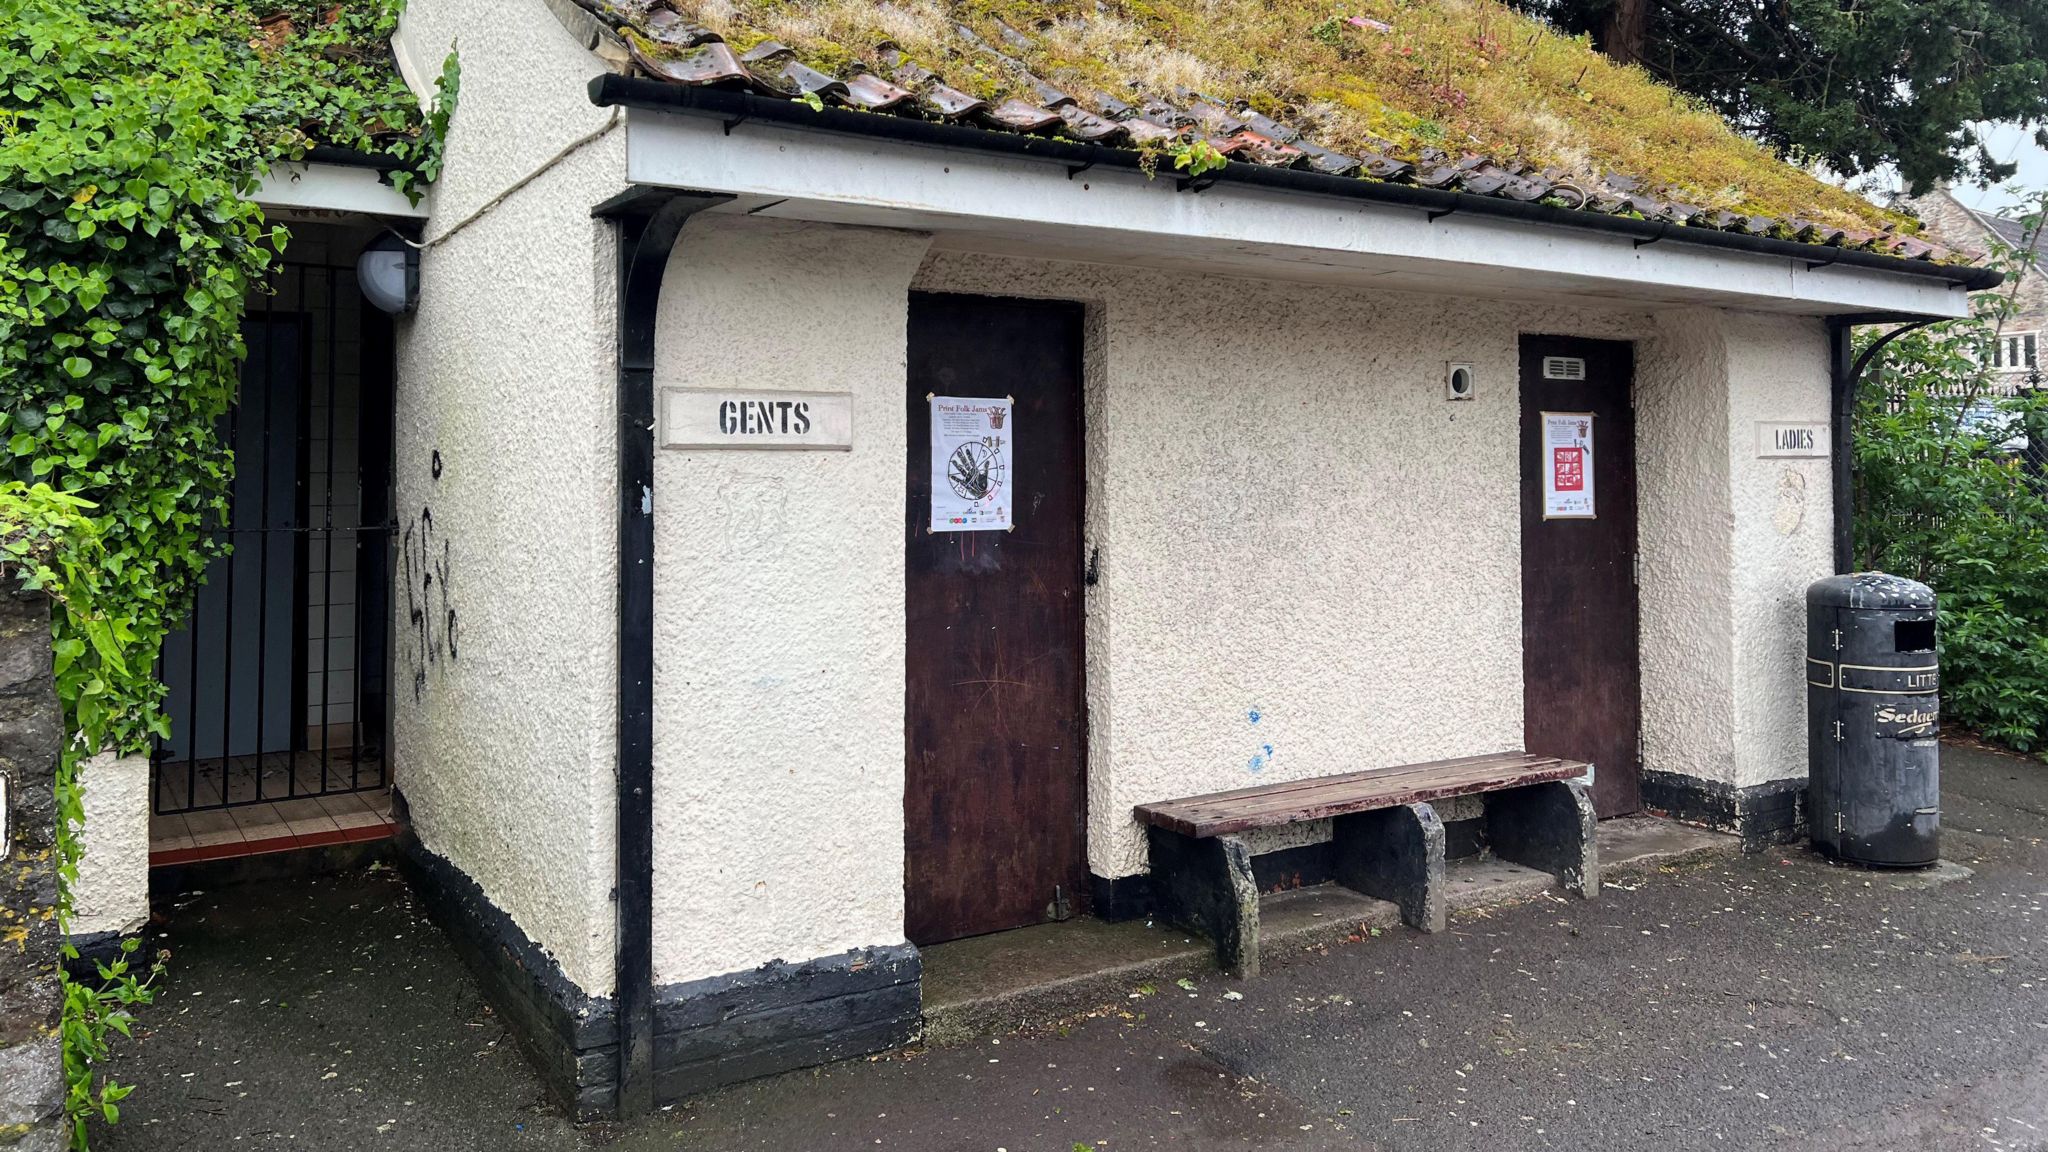 Uncertainty over future of toilets in tourist village